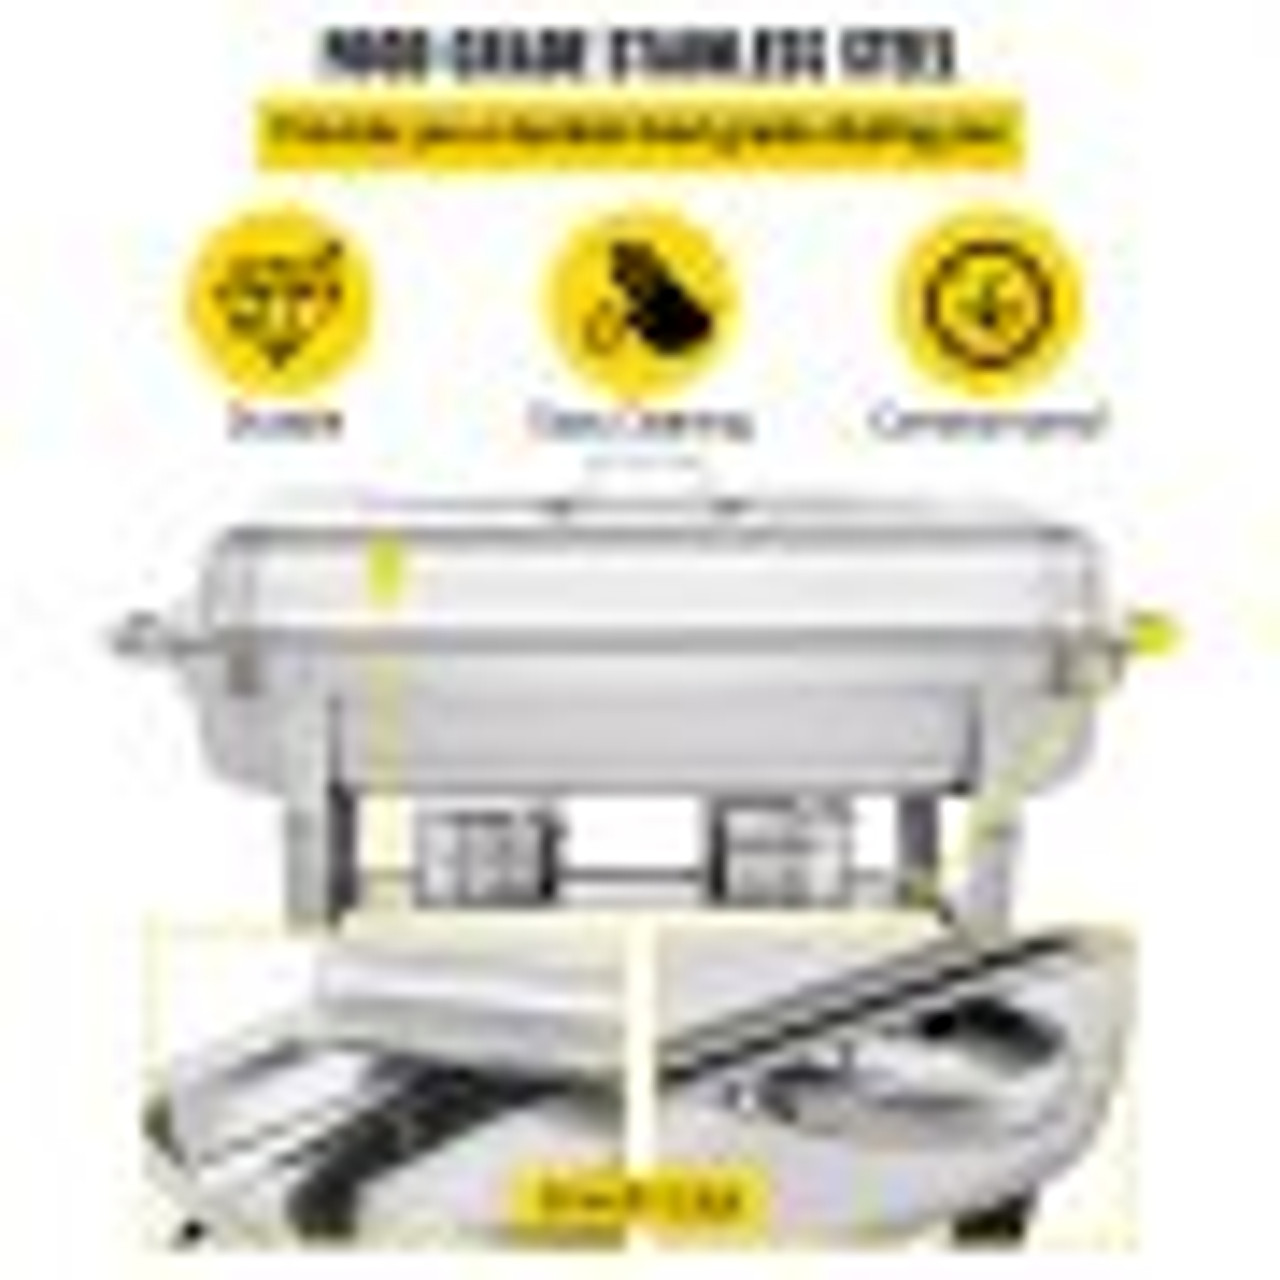 Chafing Dish 3 Packs, 9 Quart Stainless Steel Chafer Complete Set, Rectangular Chafers for Catering Buffet Warmer Set with Folding Frame